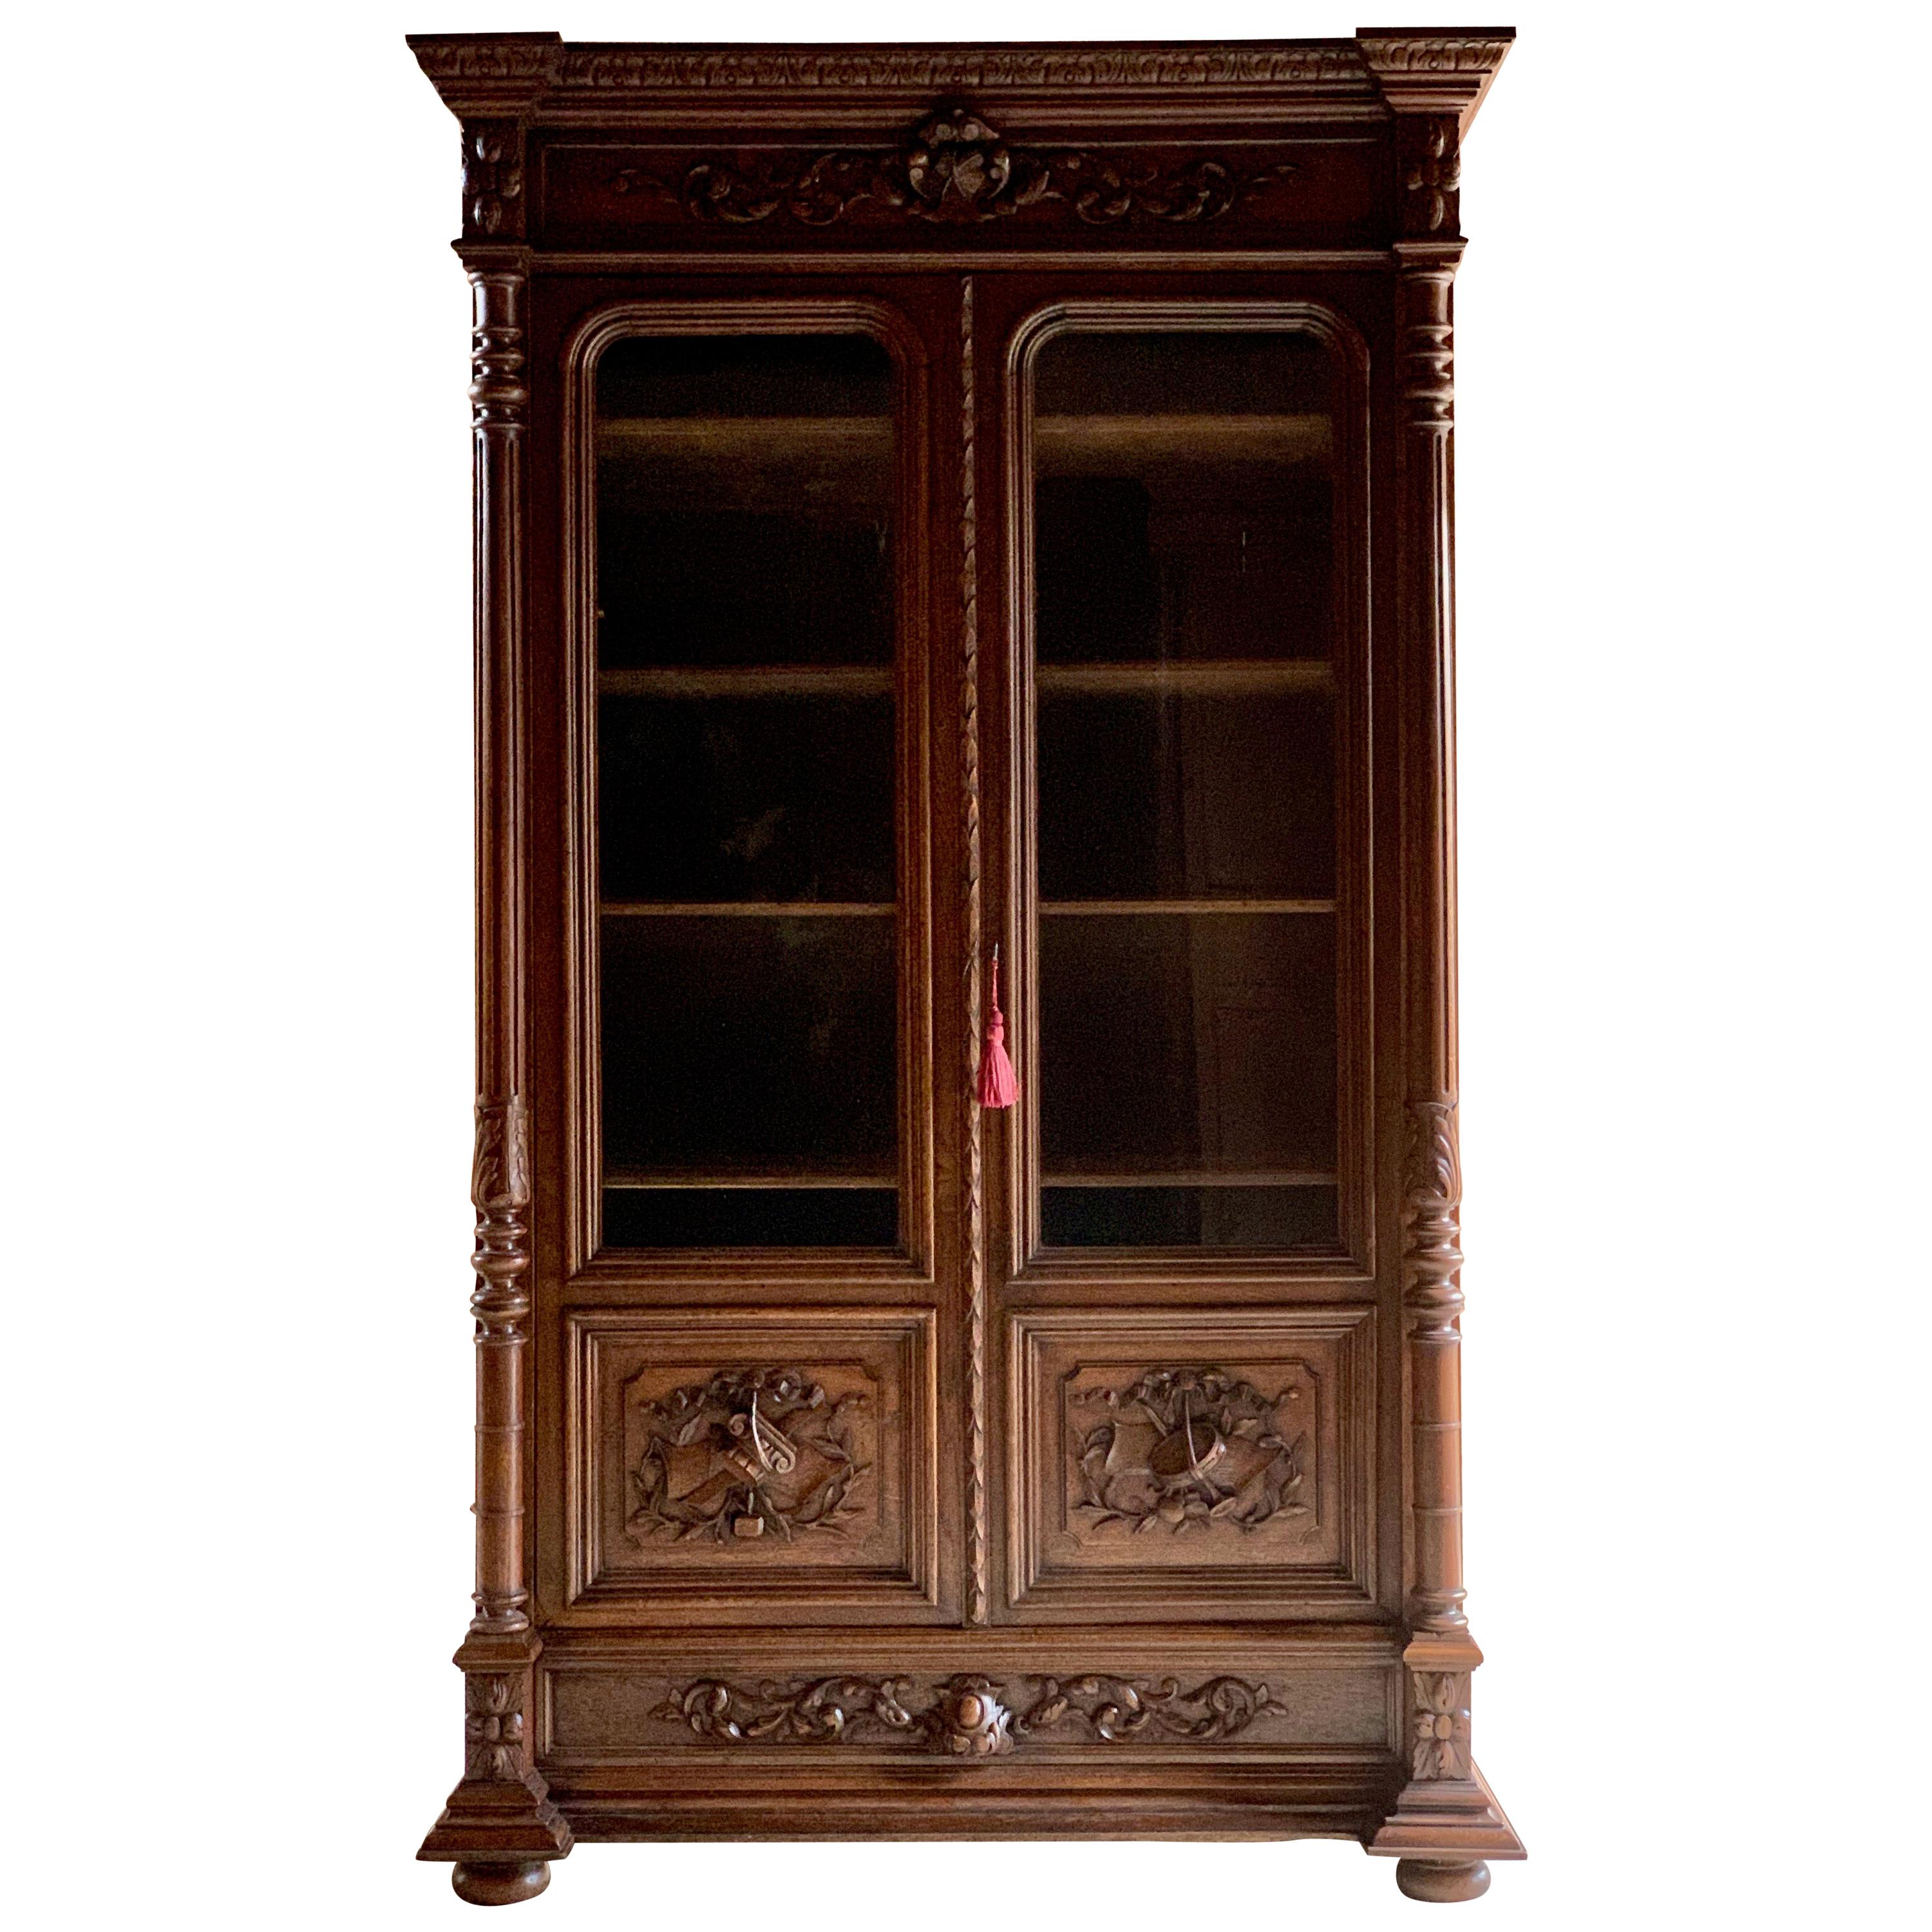 Antique French Bookcase Vitrine Heavily Carved Solid Oak, circa 1890